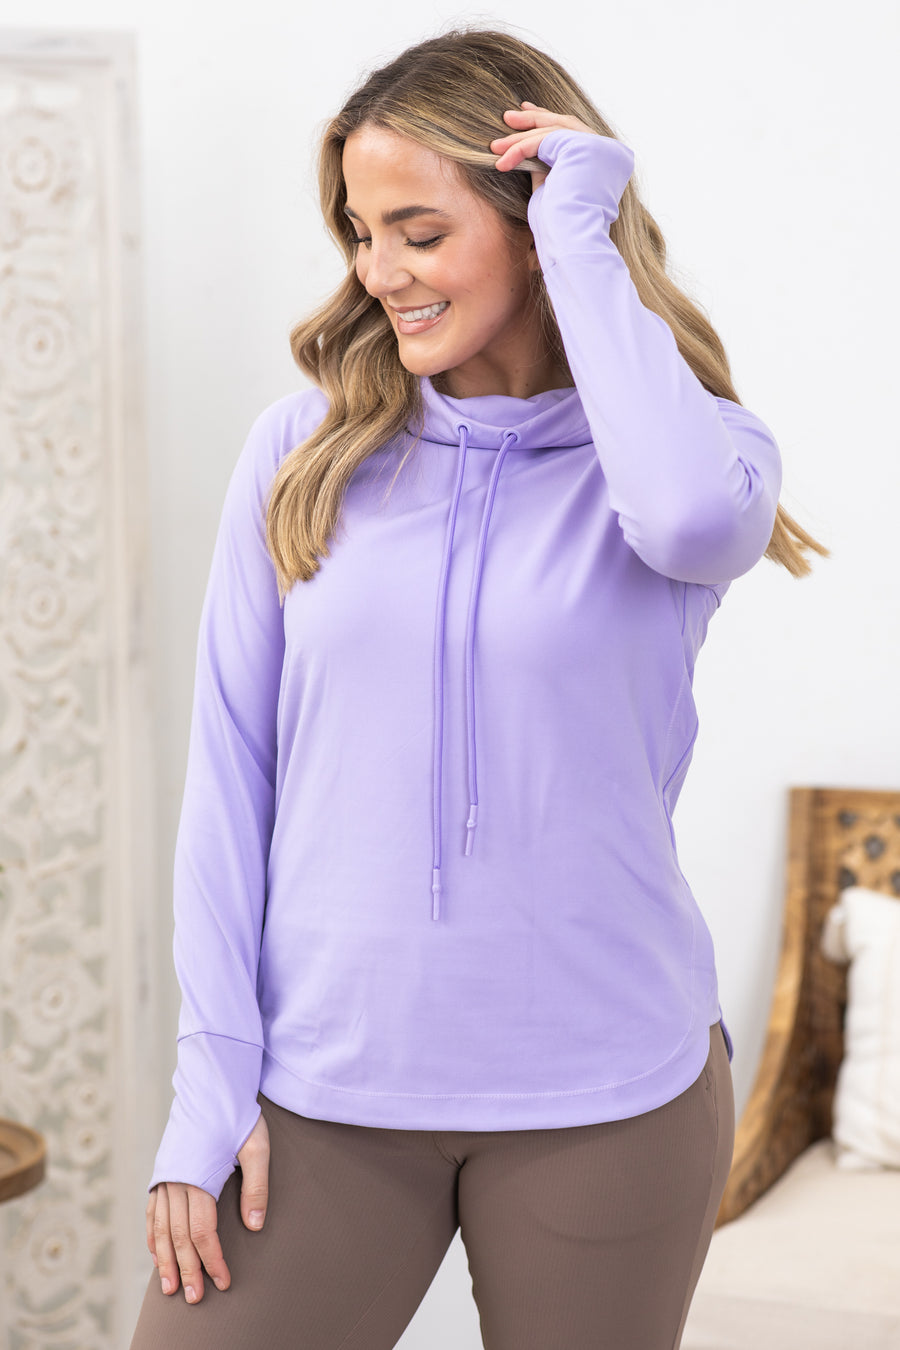 Trendy, stylish activewear that keeps you comfortable | Filly Flair ...